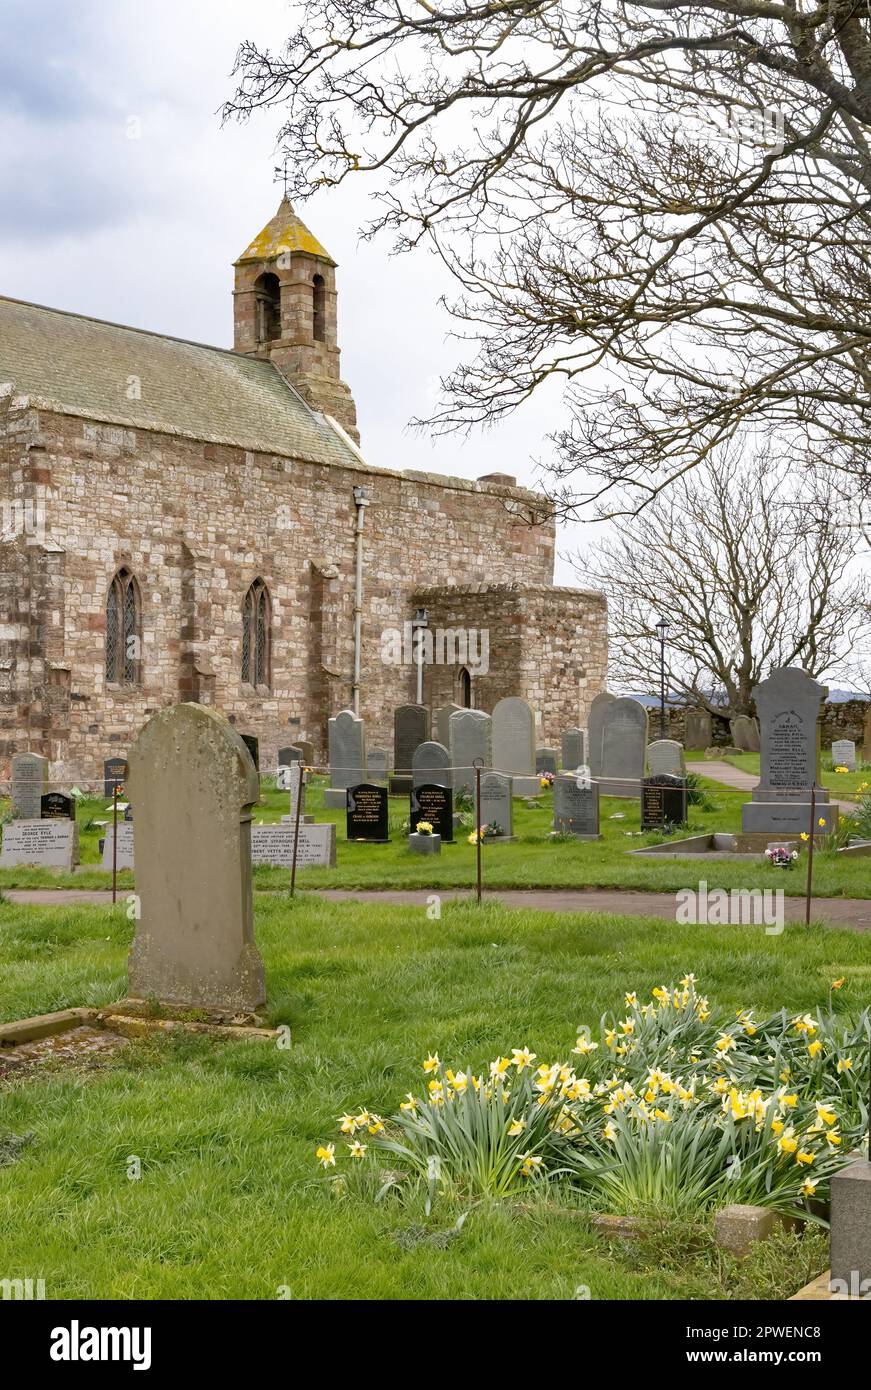 St Marys Church, or St Mary the Virgin Church, exterior of12th century stone church in spring on Lindisfarne or Holy Island, Northumberland UK Stock Photo